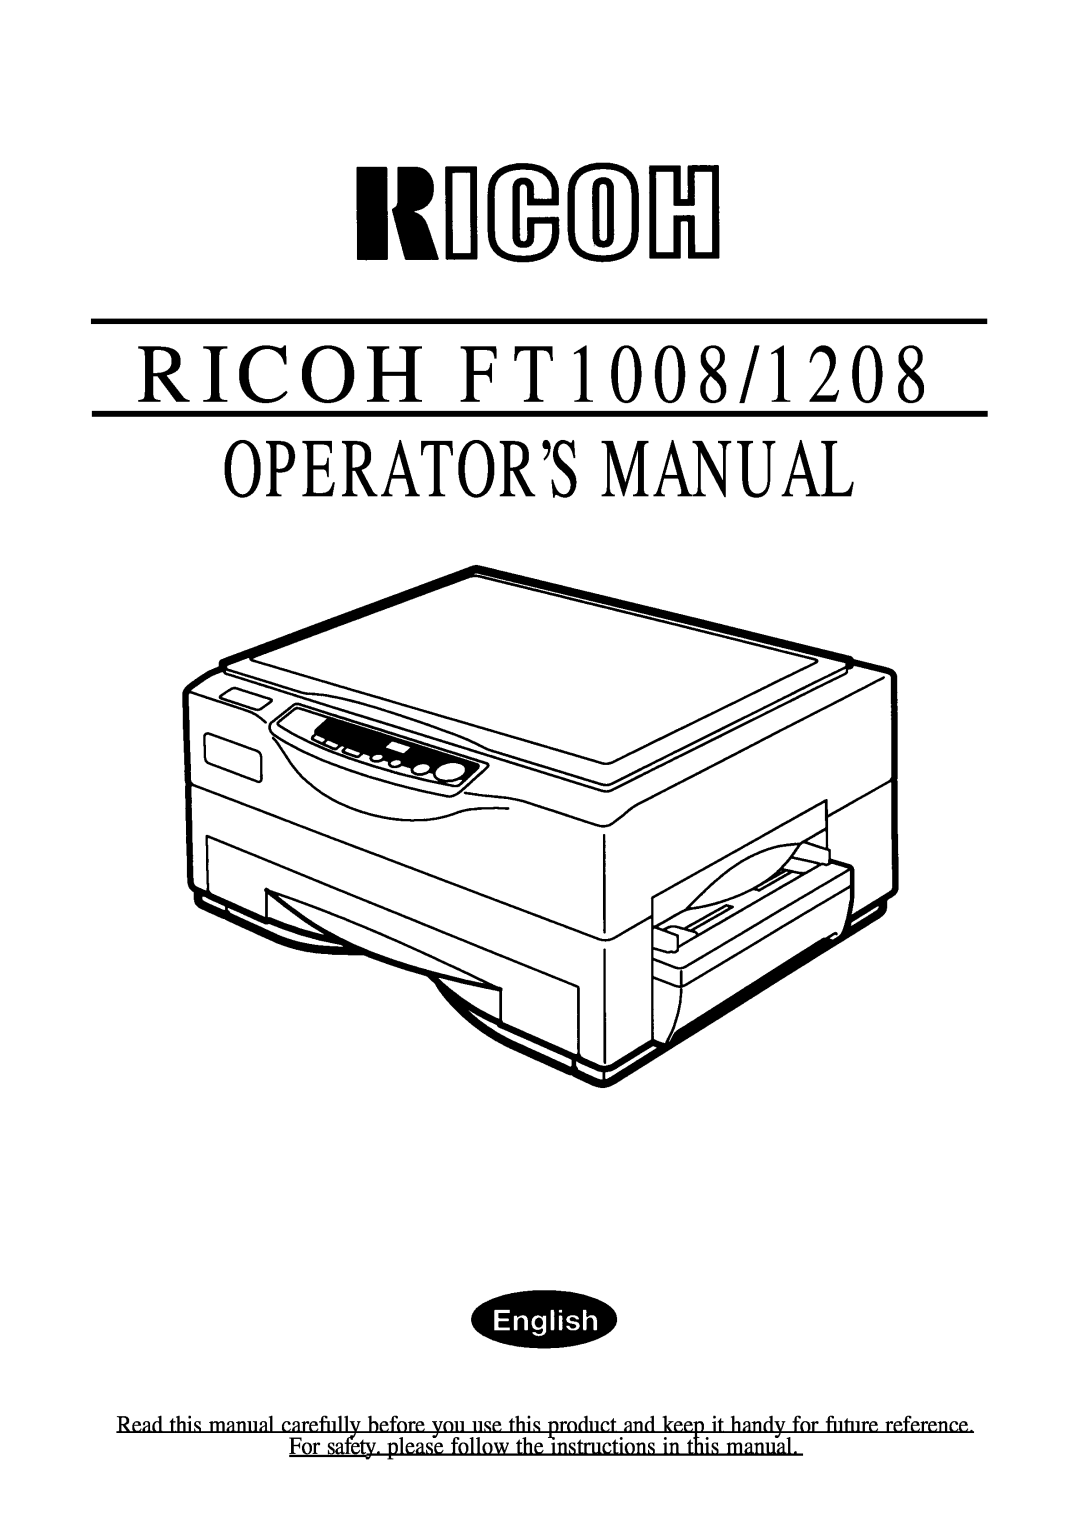 Ricoh FT1208 manual RICOH FT1008/1208, Operator’S Manual, For safety. please follow the instructions in this manual 